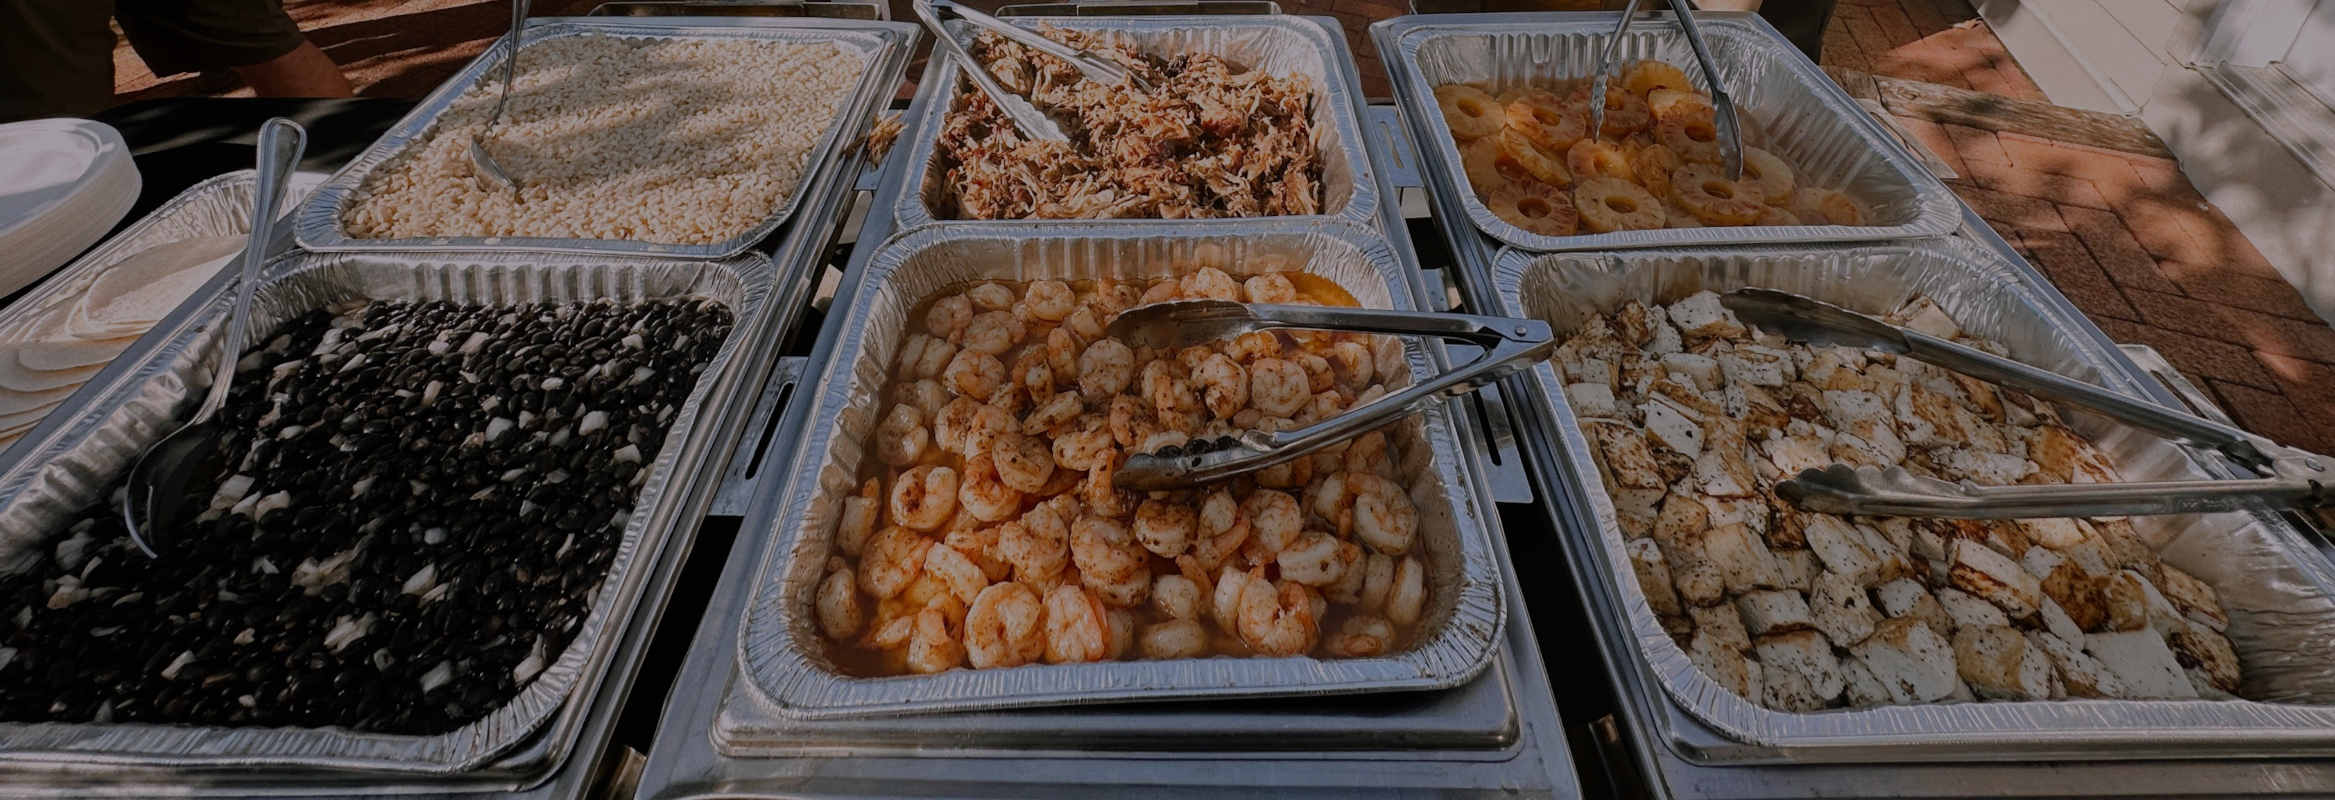 Trays of food with tongs